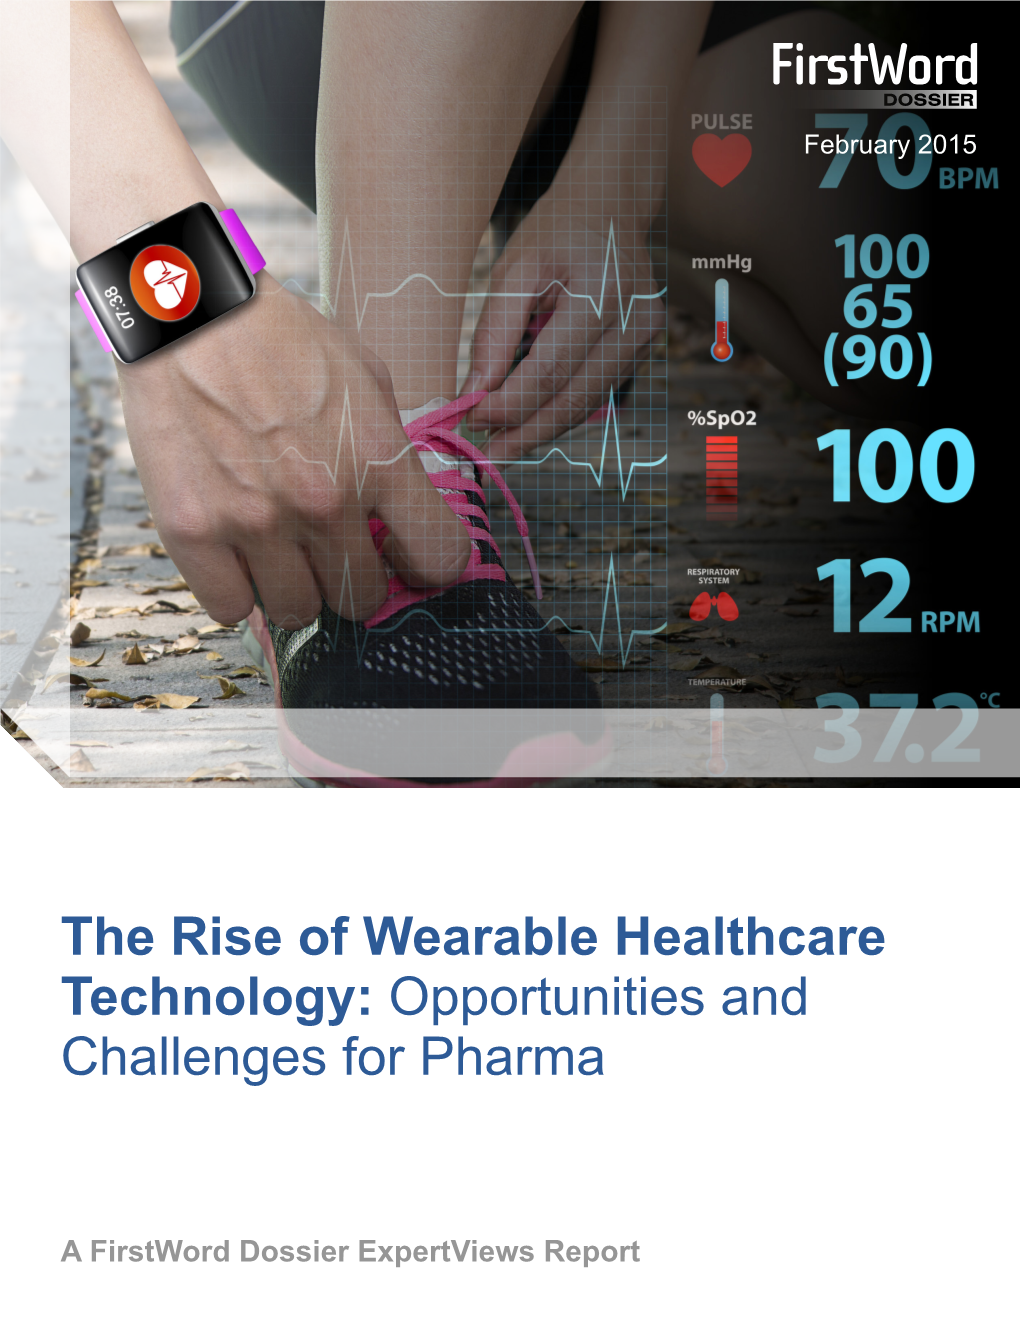 The Rise of Wearable Healthcare Technology: Opportunities and Challenges for Pharma